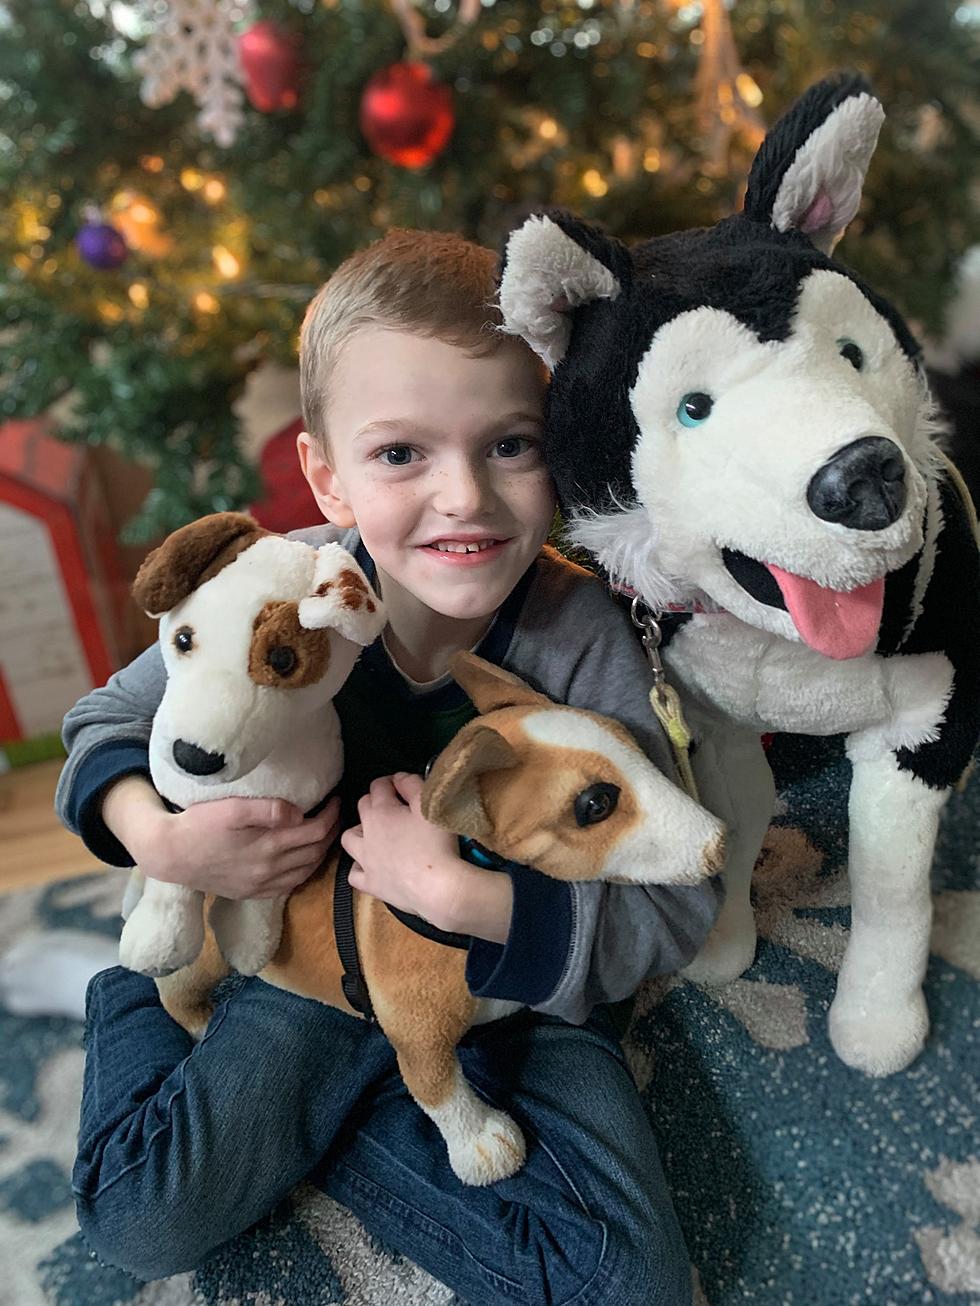 Service Dog Could Change The Life Of Casper Boy With Rare Disease